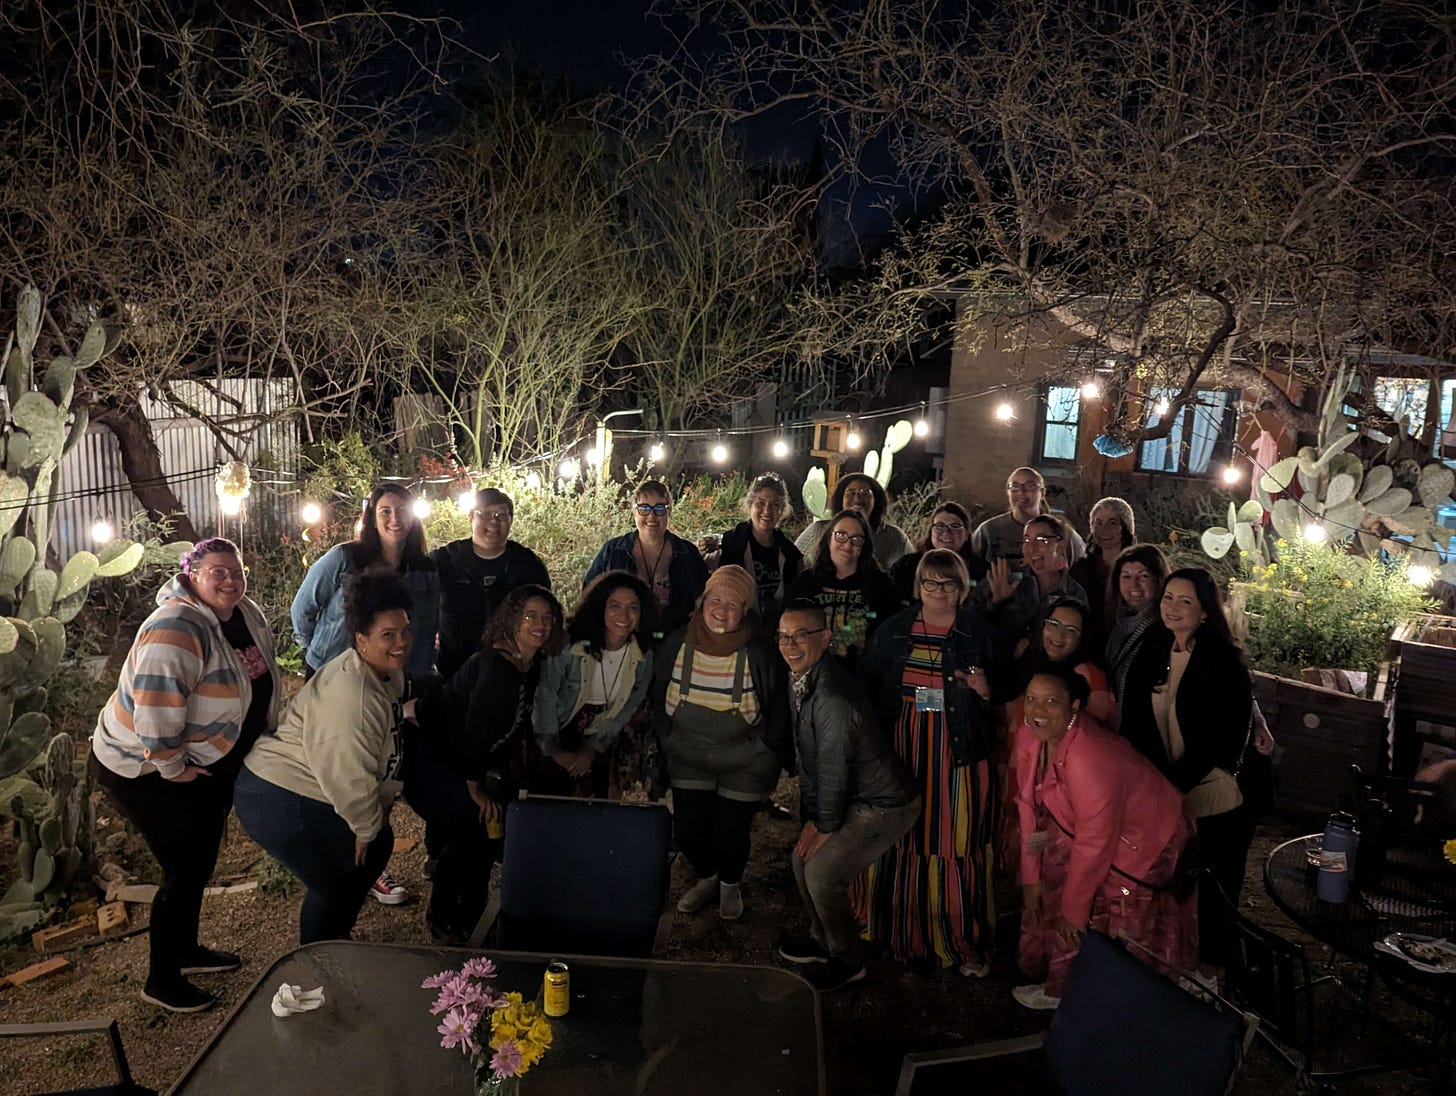 Picture taken in picturesque Arizona backyard at night of a bunch of romance authors, moderators from the panels, and other related people!